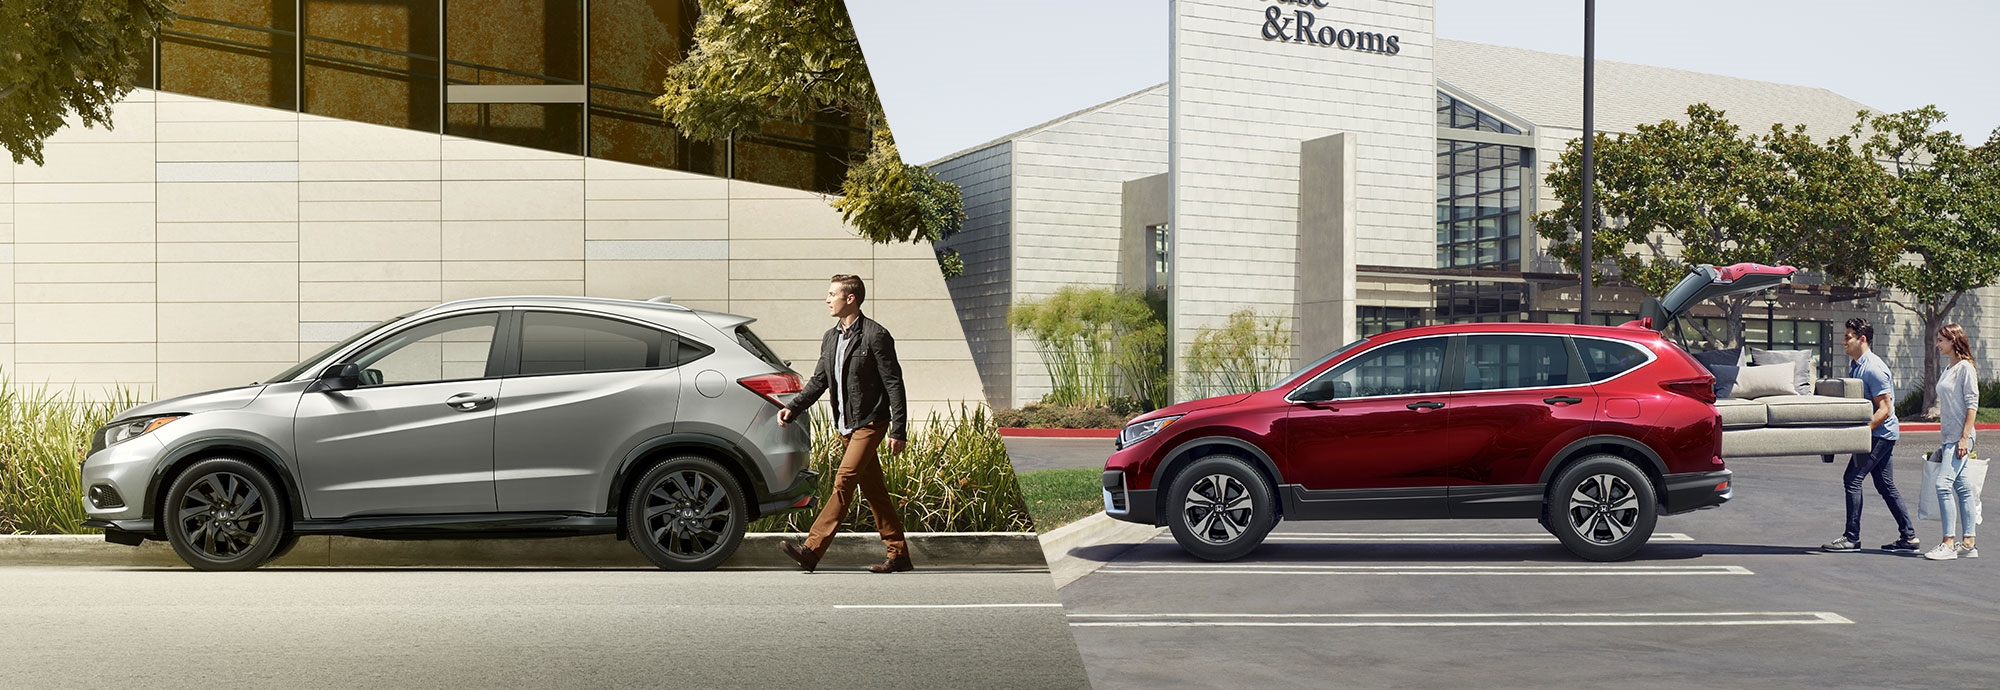 Difference Between A Honda CR-V And A Honda HR-V